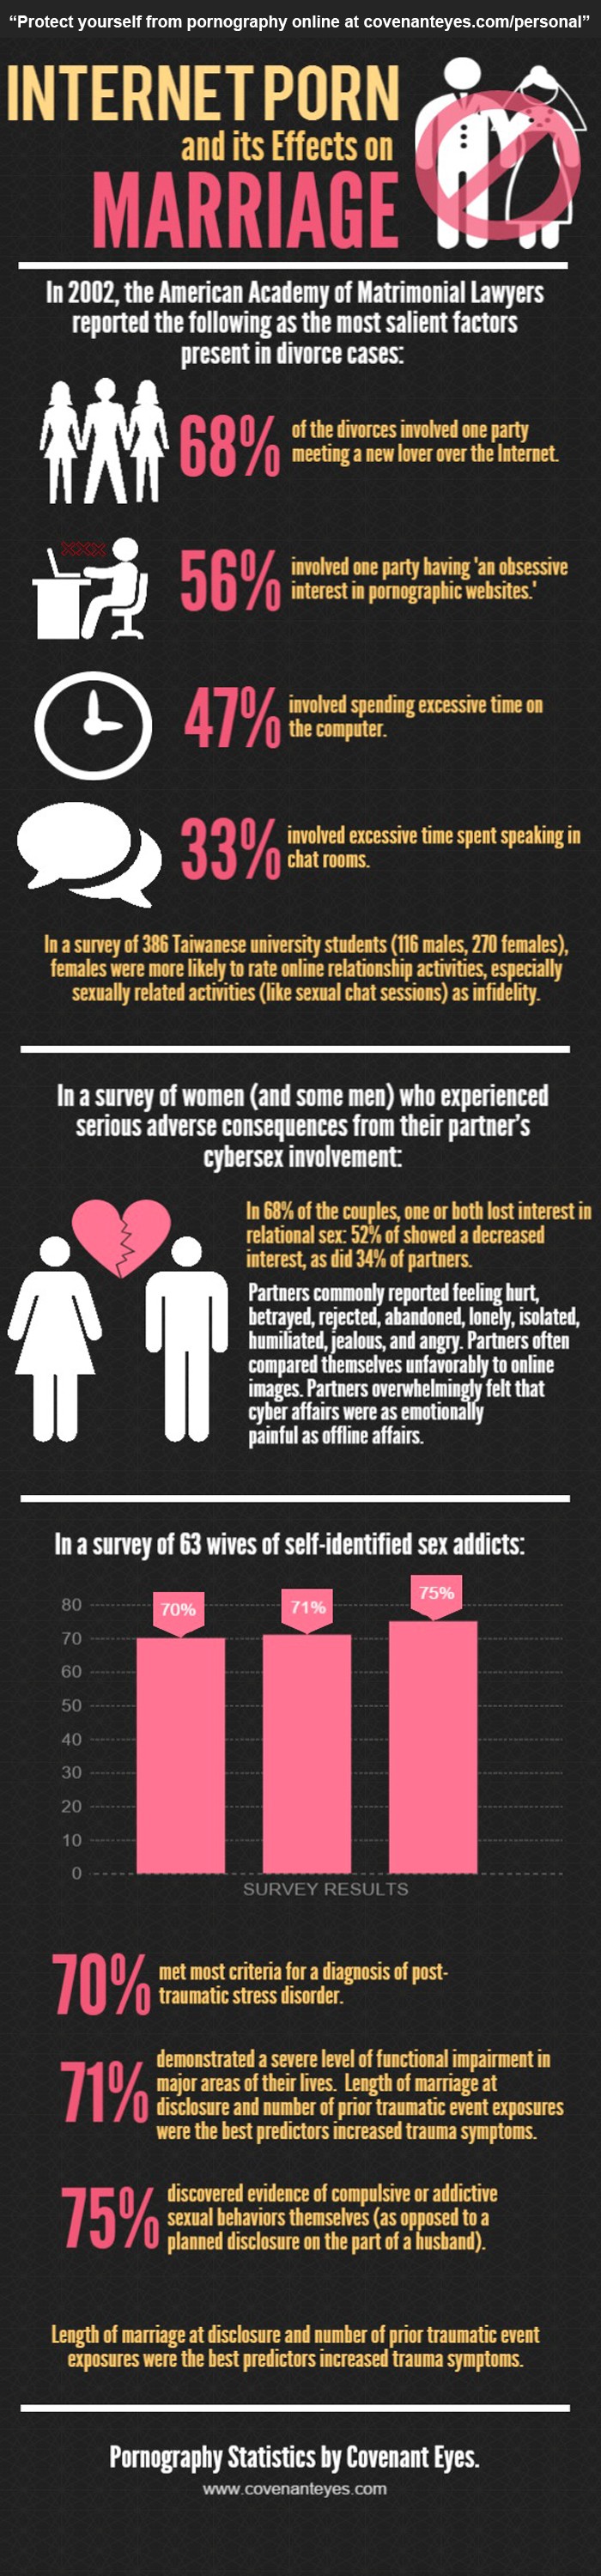 Porn Addiction Problems Effects on Marriage (Infog photo